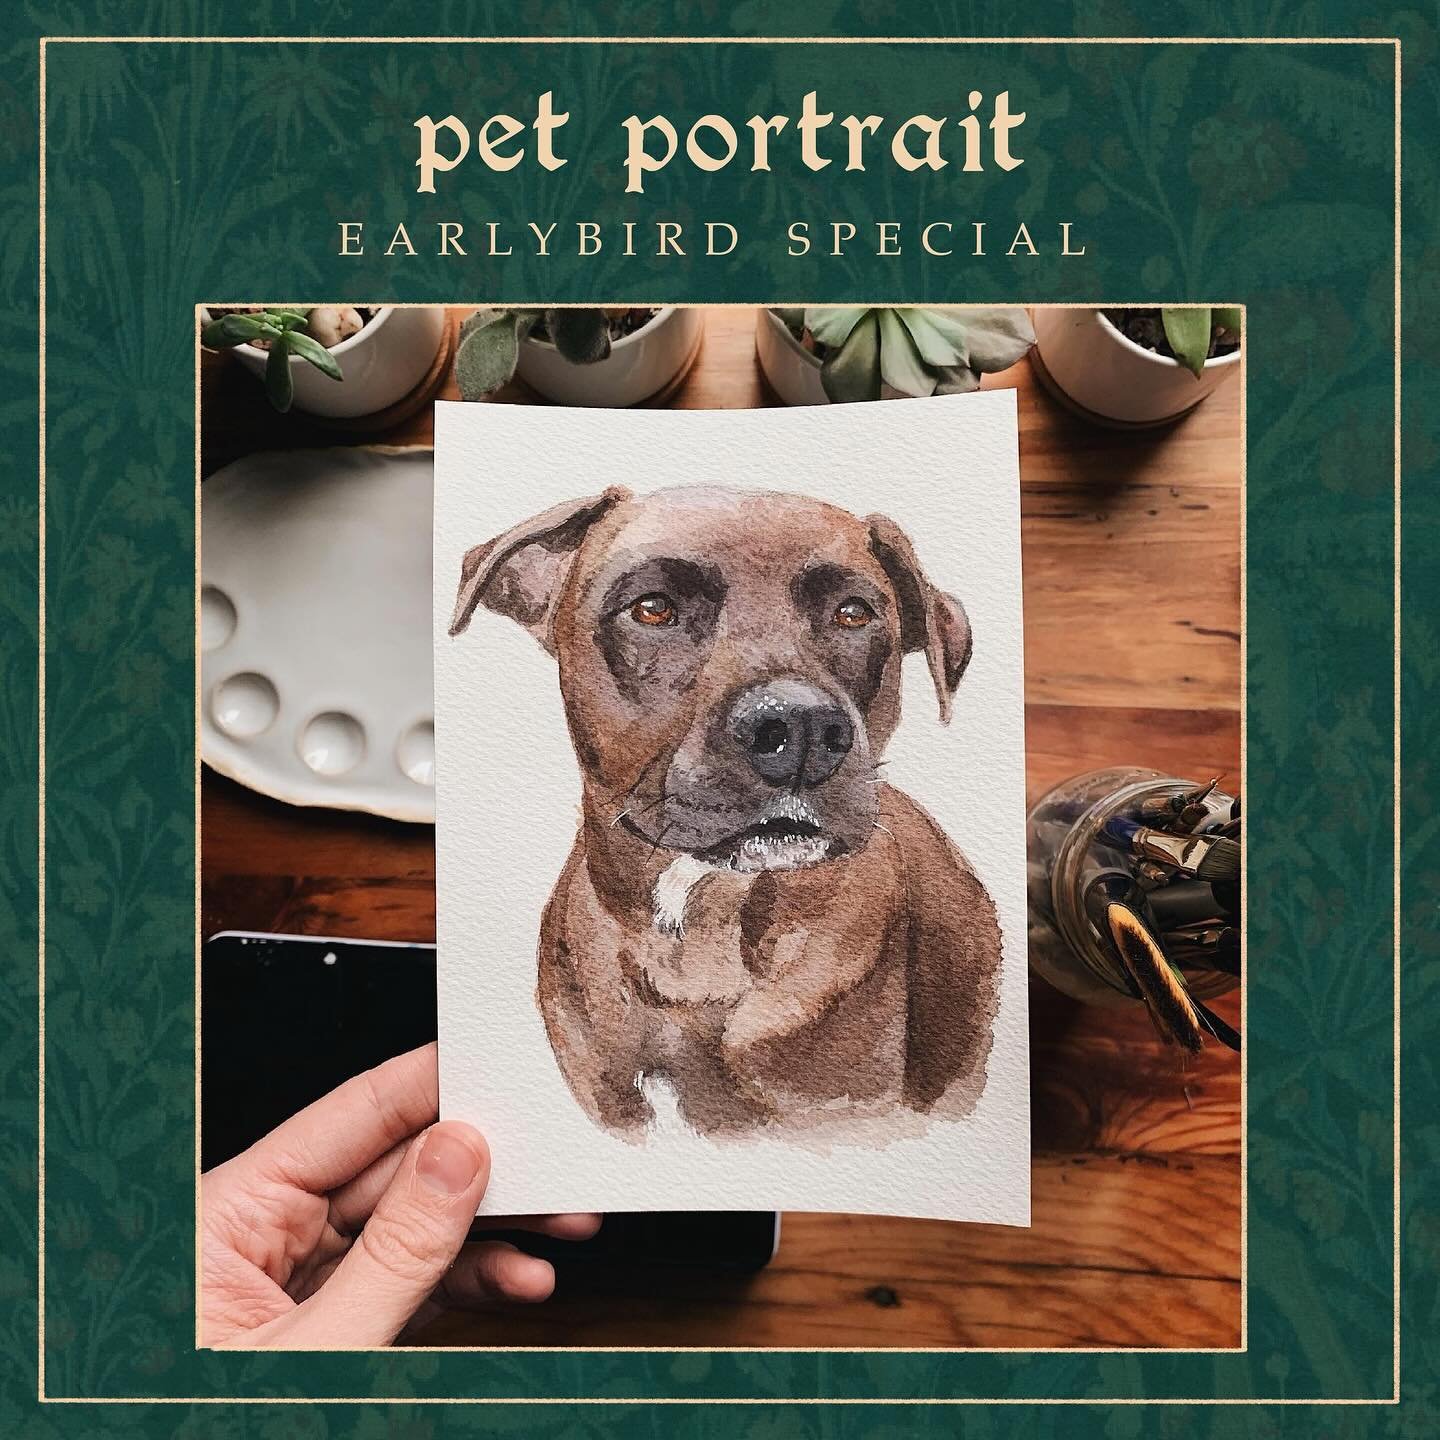 It&rsquo;s that time of year! 🐶🐱🐴🐰🦜 The annual earlybird special is here! Get 10% off when you order pet portraits October 1-15. Ordering early helps small shops like mine take on the hectic busyness of the season! We&rsquo;re able to take on mo